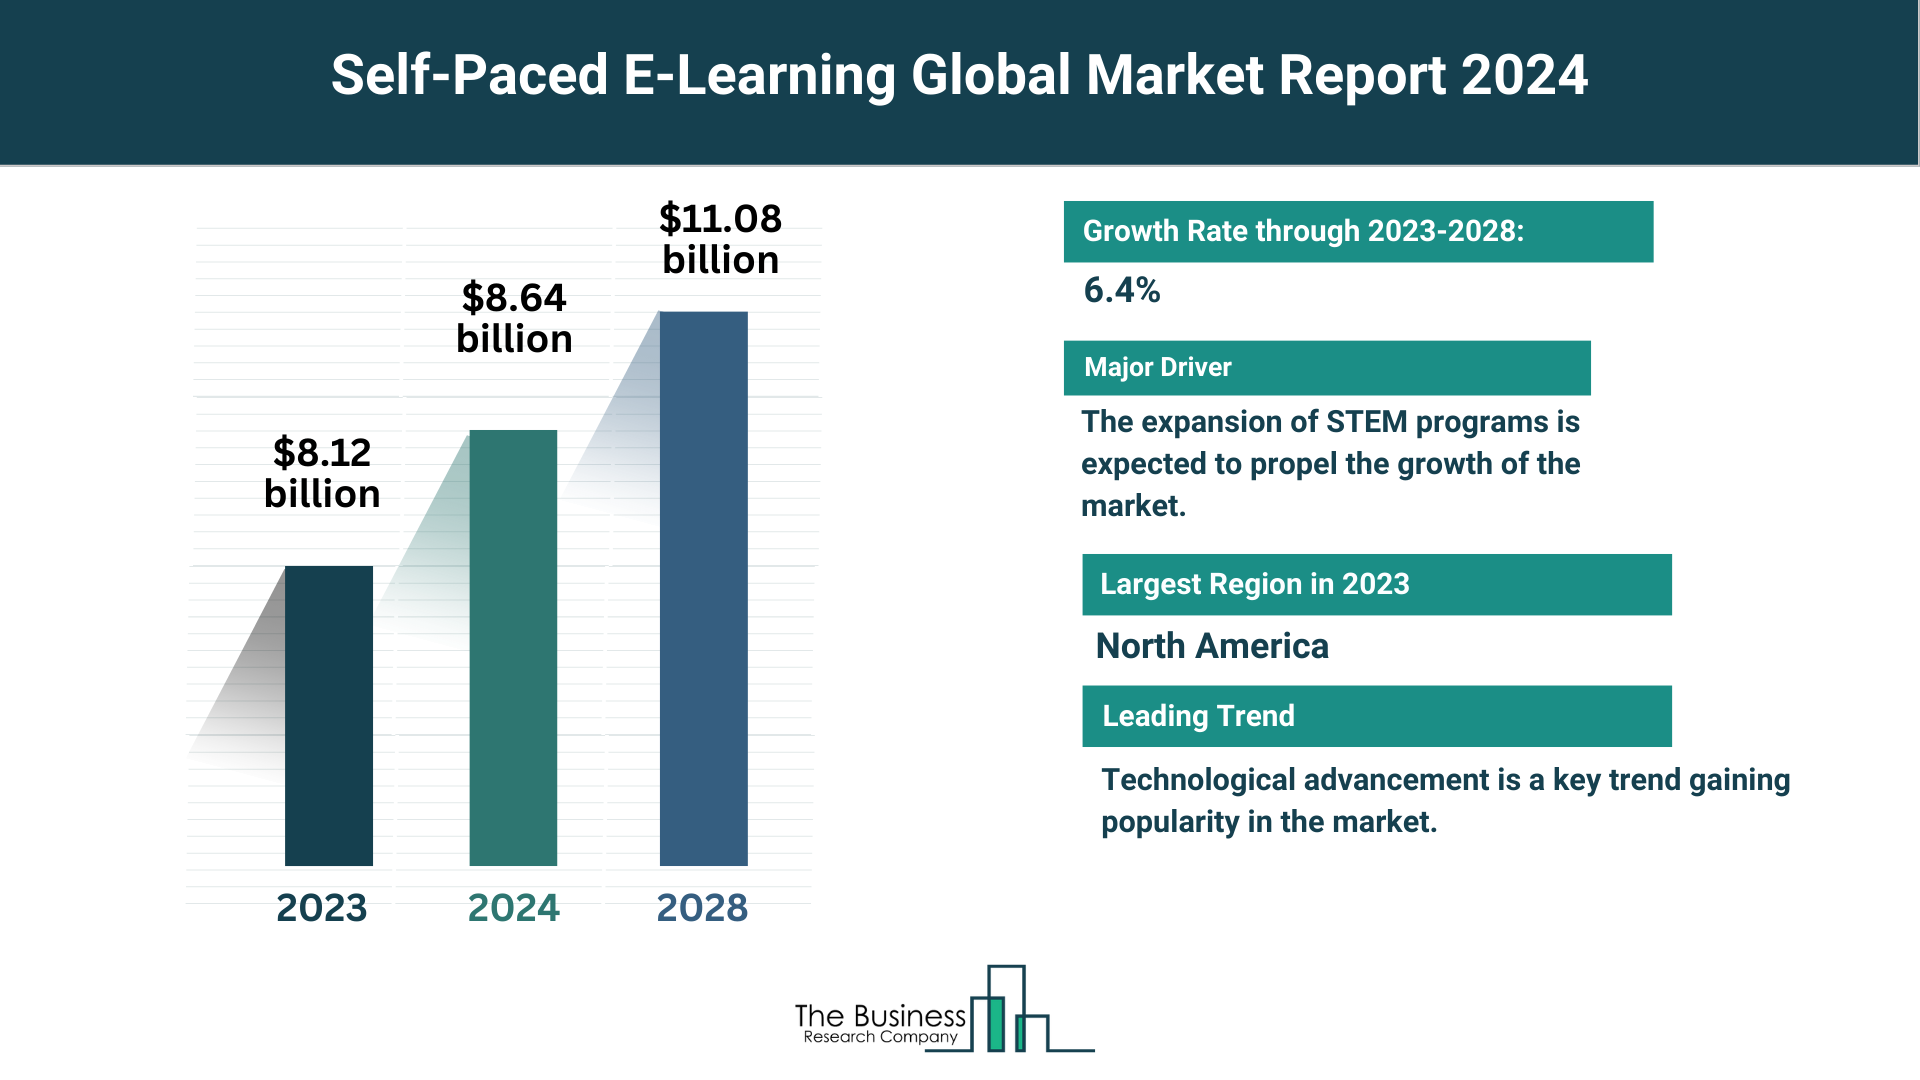 5 Key Takeaways From The Self-Paced E-Learning Market Report 2024